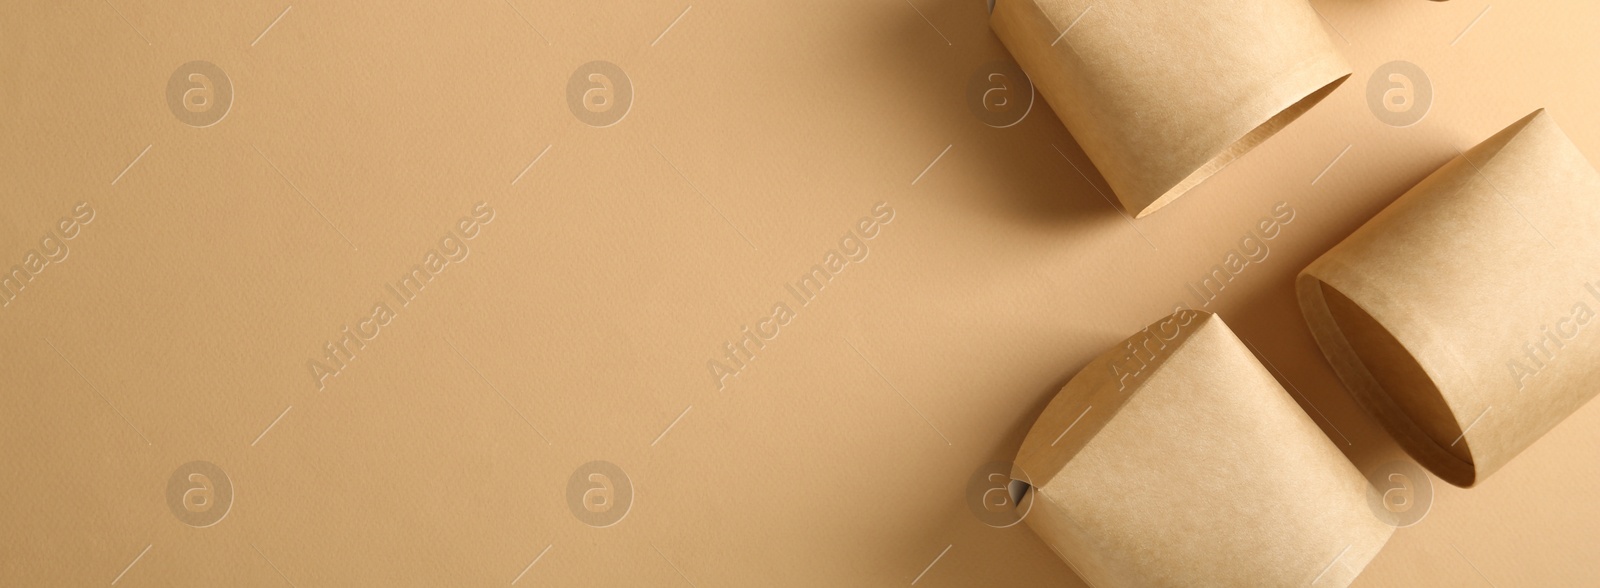 Image of Eco friendly food containers on beige background, flat lay with space for text. Banner design